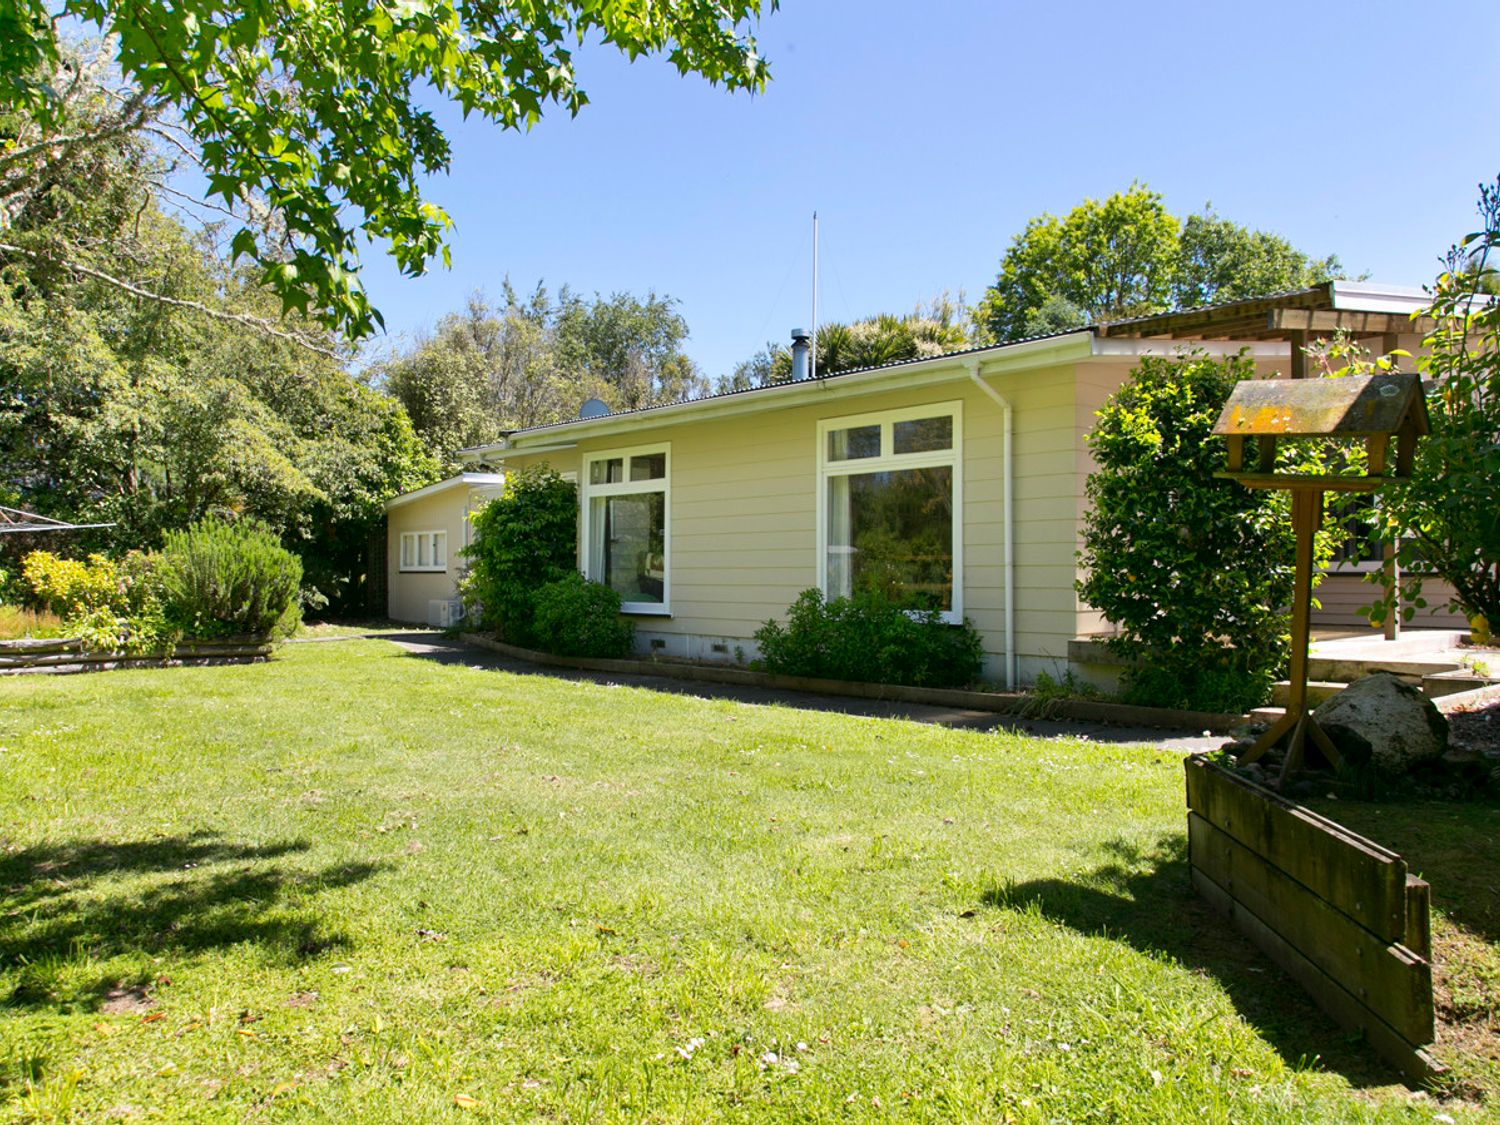 The Trout House - Turangi Holiday Home -  - 1031128 - photo 1